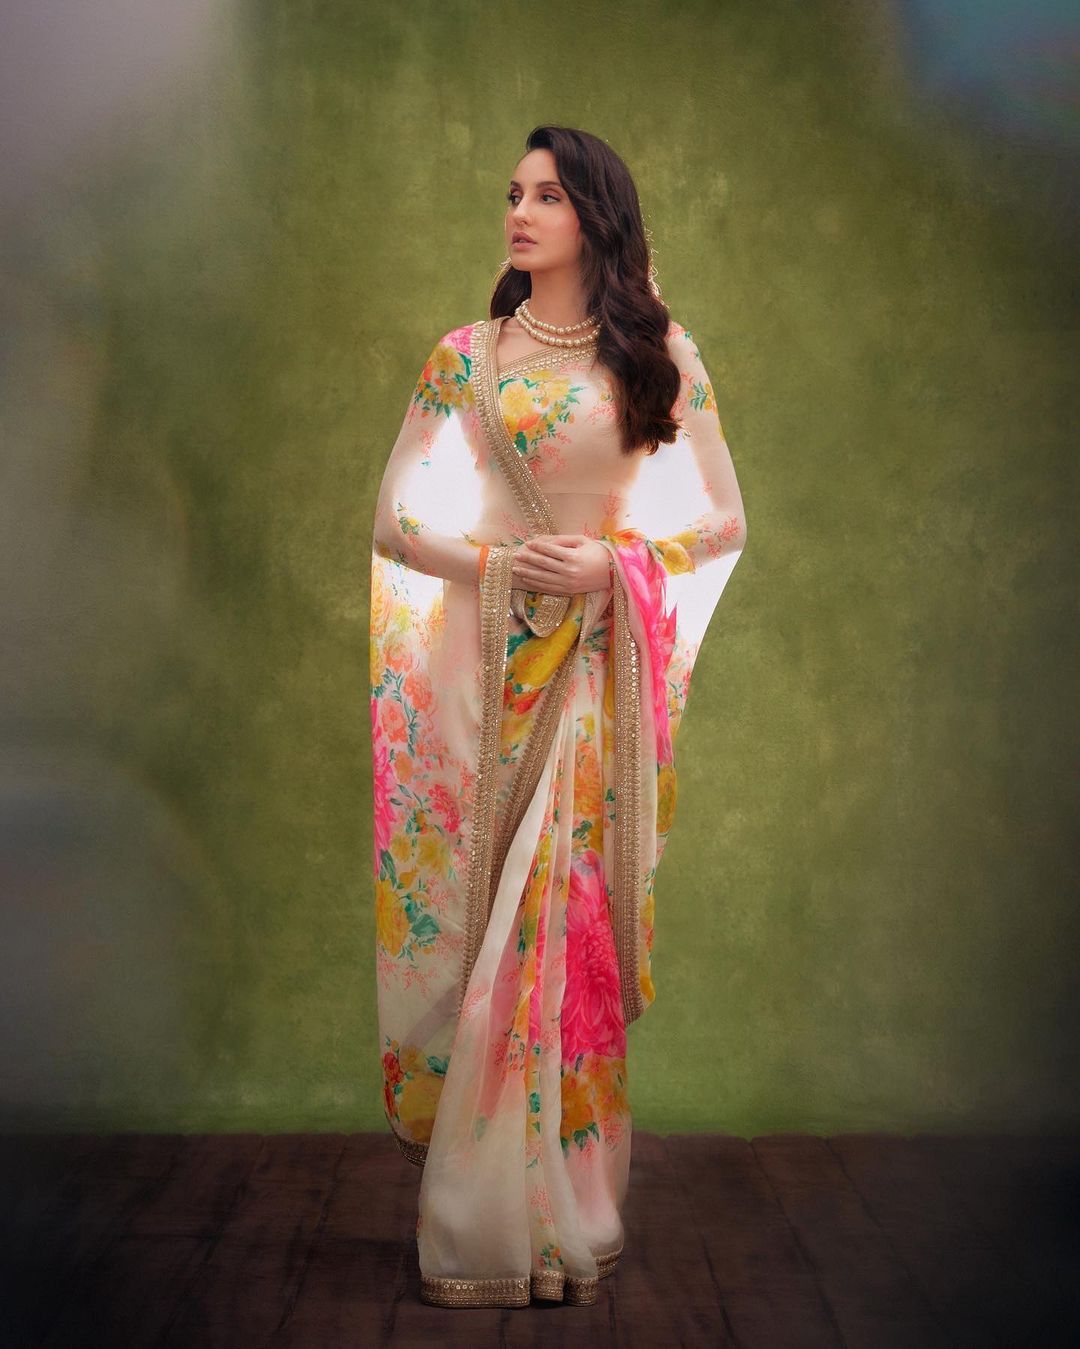 Nora Fatehi looks grace personified in the vibrant floral saree. 